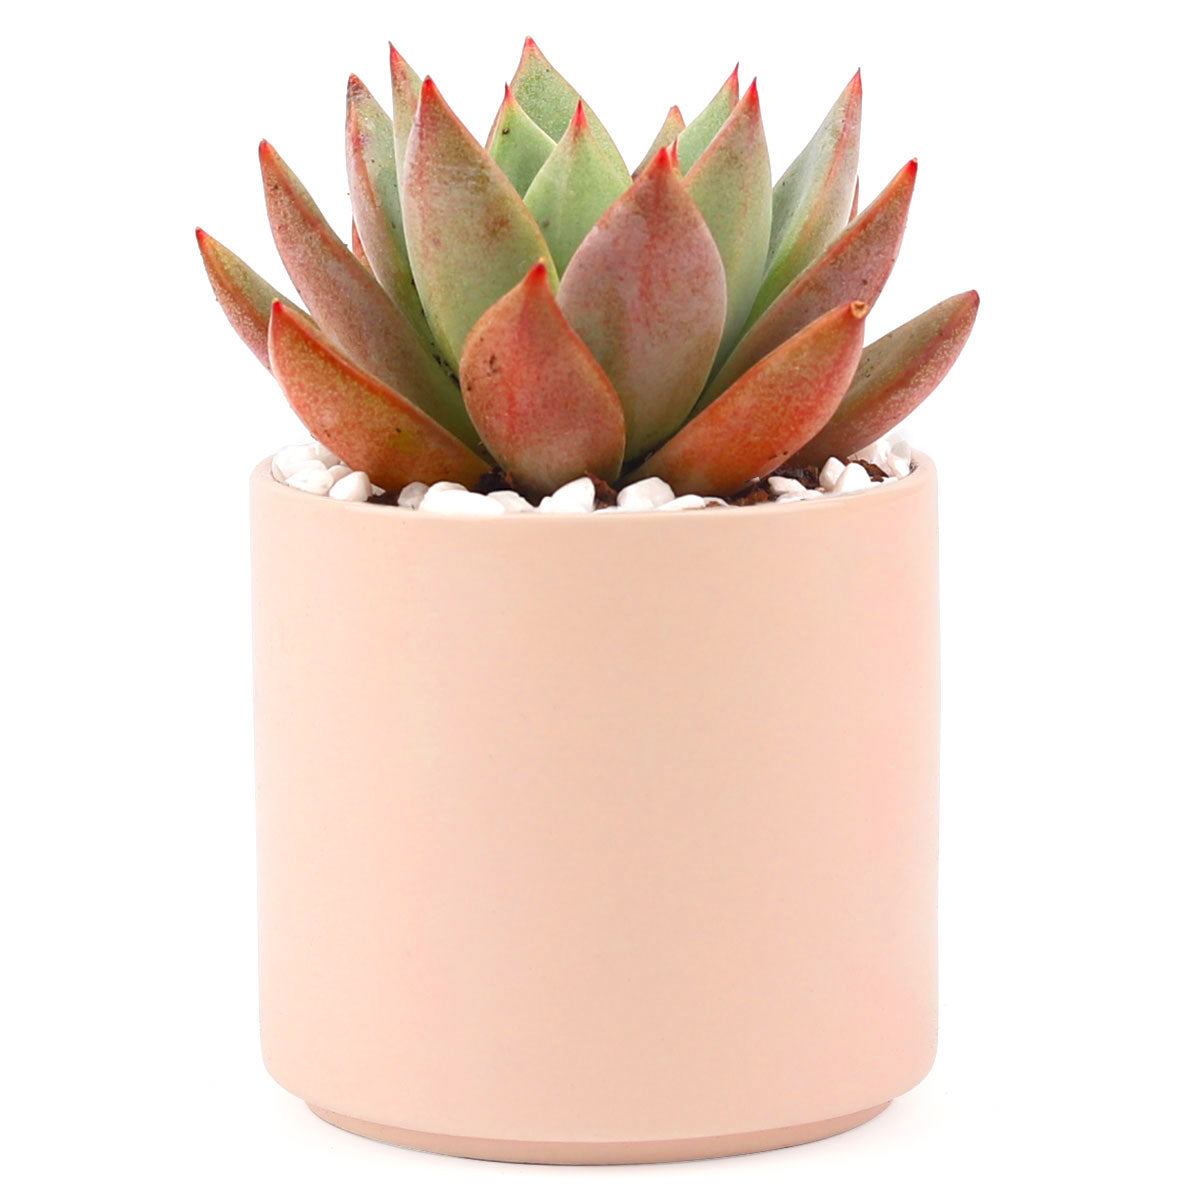 Succulent with Large Modern Cylinder Pot, Unique Succulent Gift Ideas, Succulent in ceramic pots, Succulent Decor Ideas, 4 inch succulent pots for sale, EcoFriendly Succulent Gift Box for Employee, Corporate Gift Succulents For Sale Online, Succulent Thank You Gift Ideas, Thank you gift for your staff in 2023, Customizable Gift Boxes for employees and clients, Office gift for employees, Employee appreciation day 2023 ideas, Succulent Plants for Clients & Employees for sale